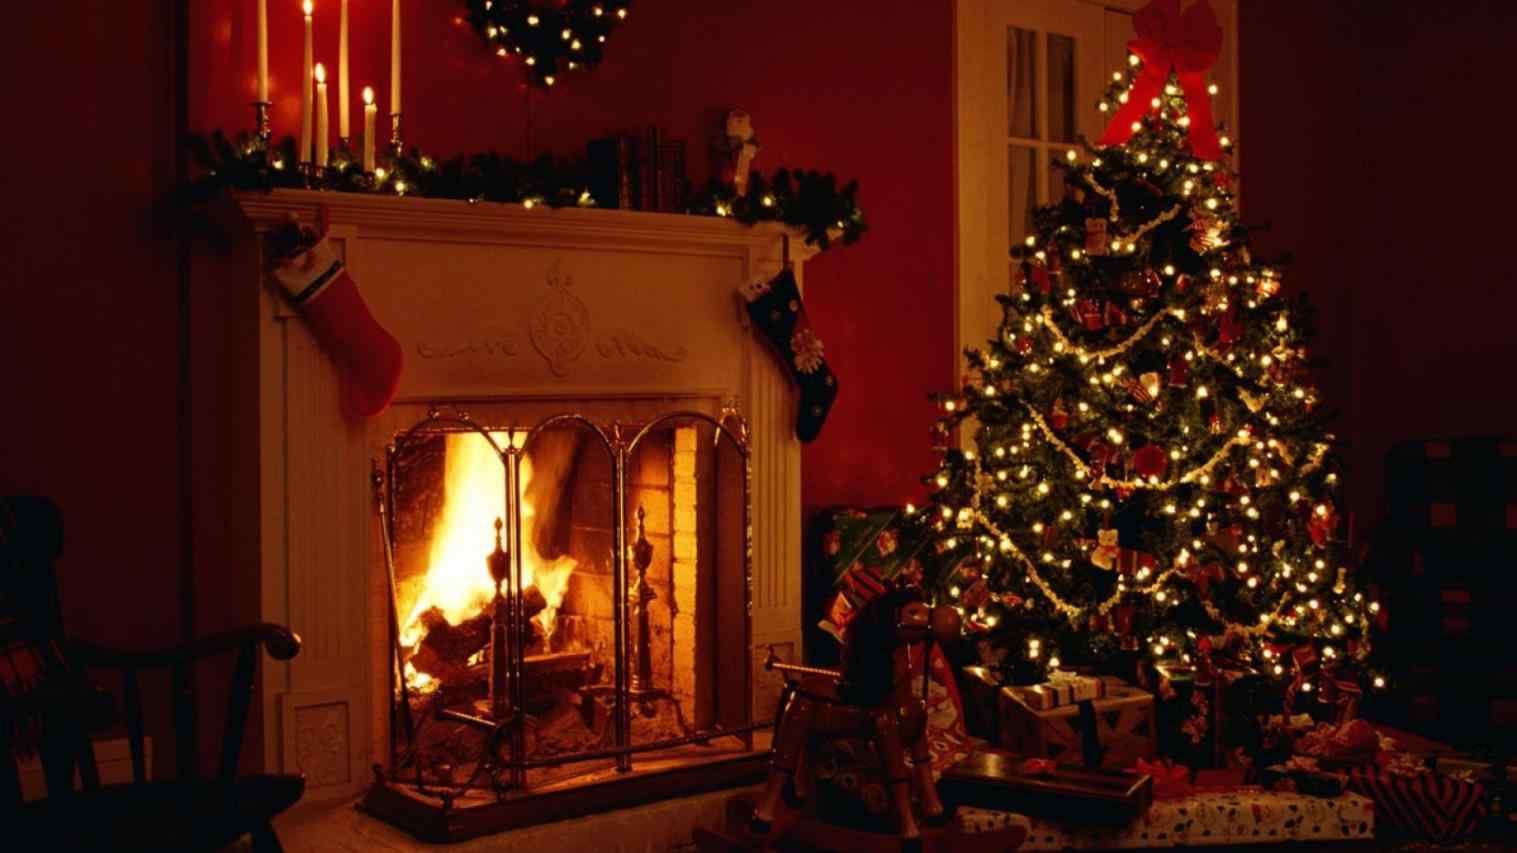 Stockings Wallpaper Fireplace Fire Holiday Festive Decorations Eq